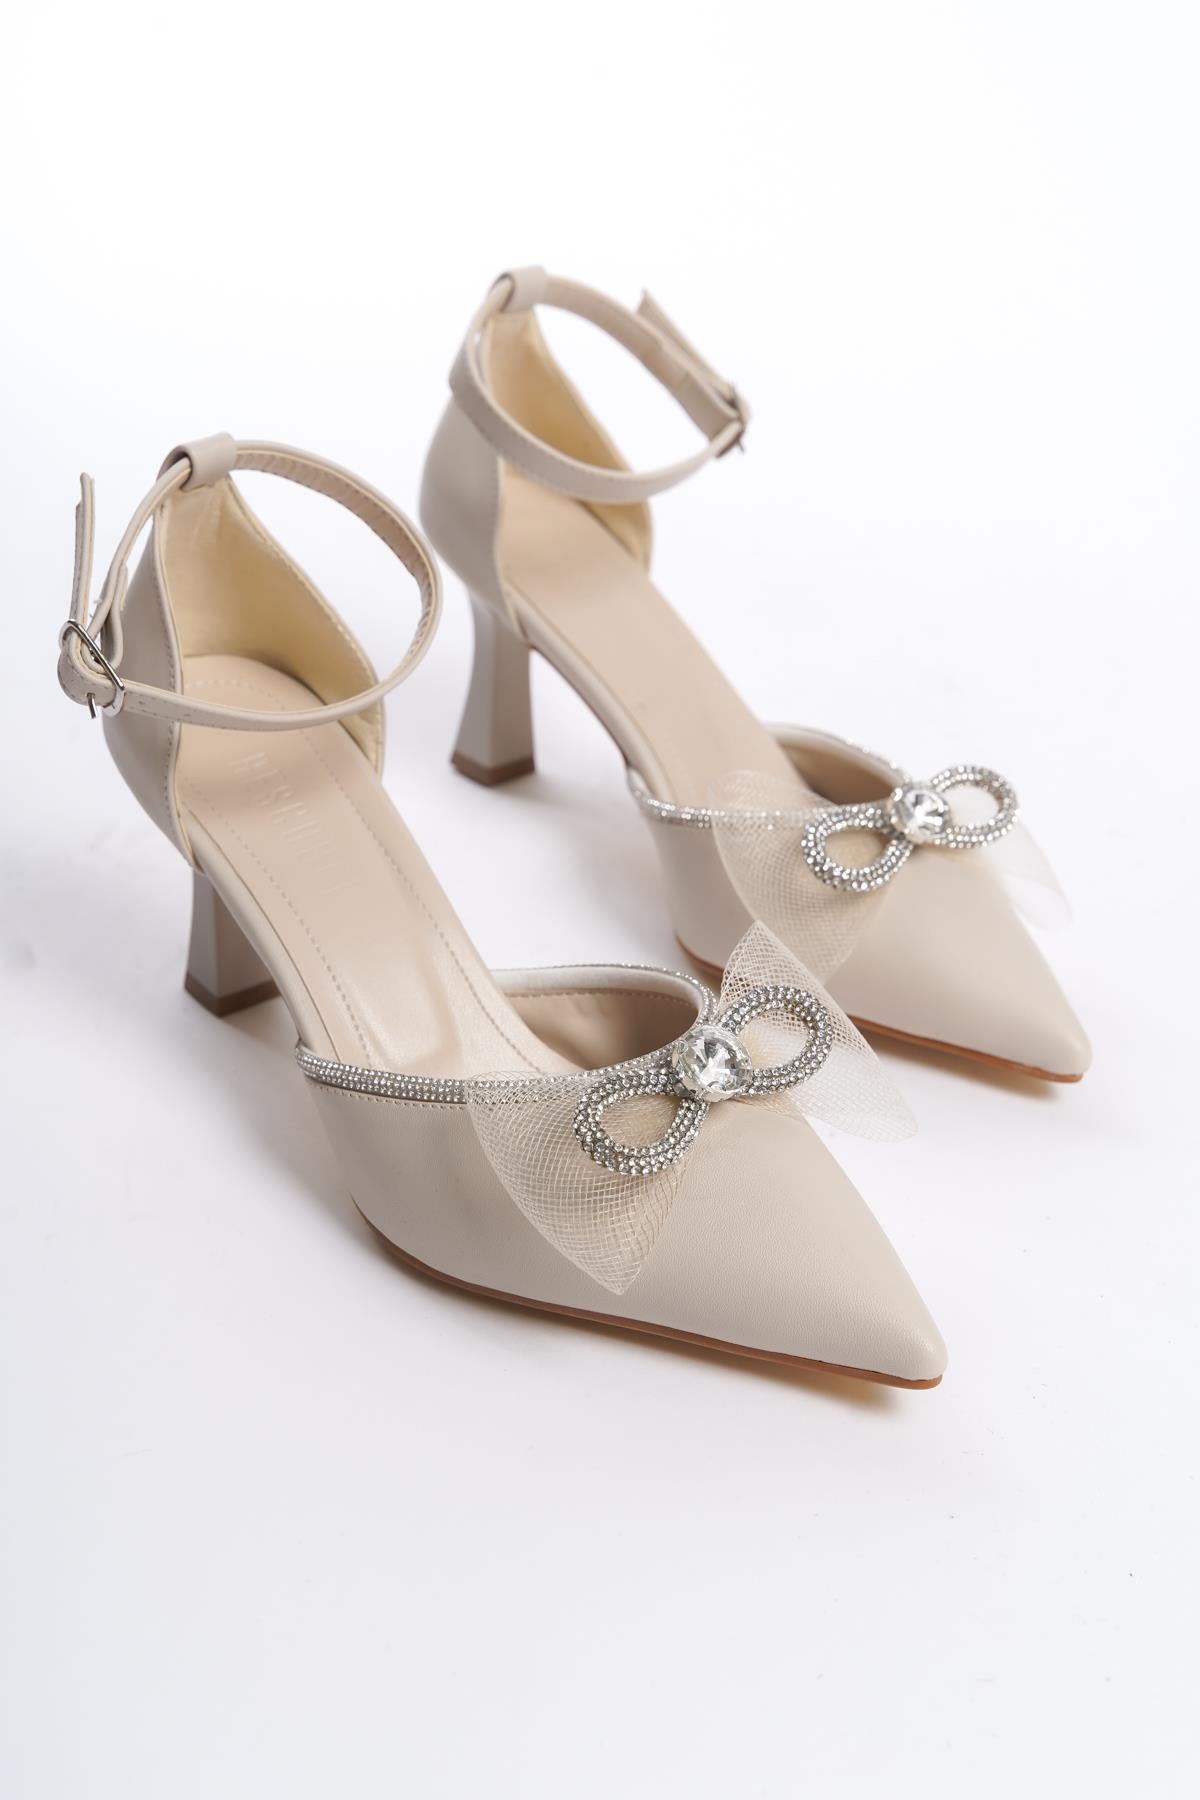 Women's Asda Beige Thin Heel Bow Evening Dress Pointed Toe Shoes - STREETMODE™